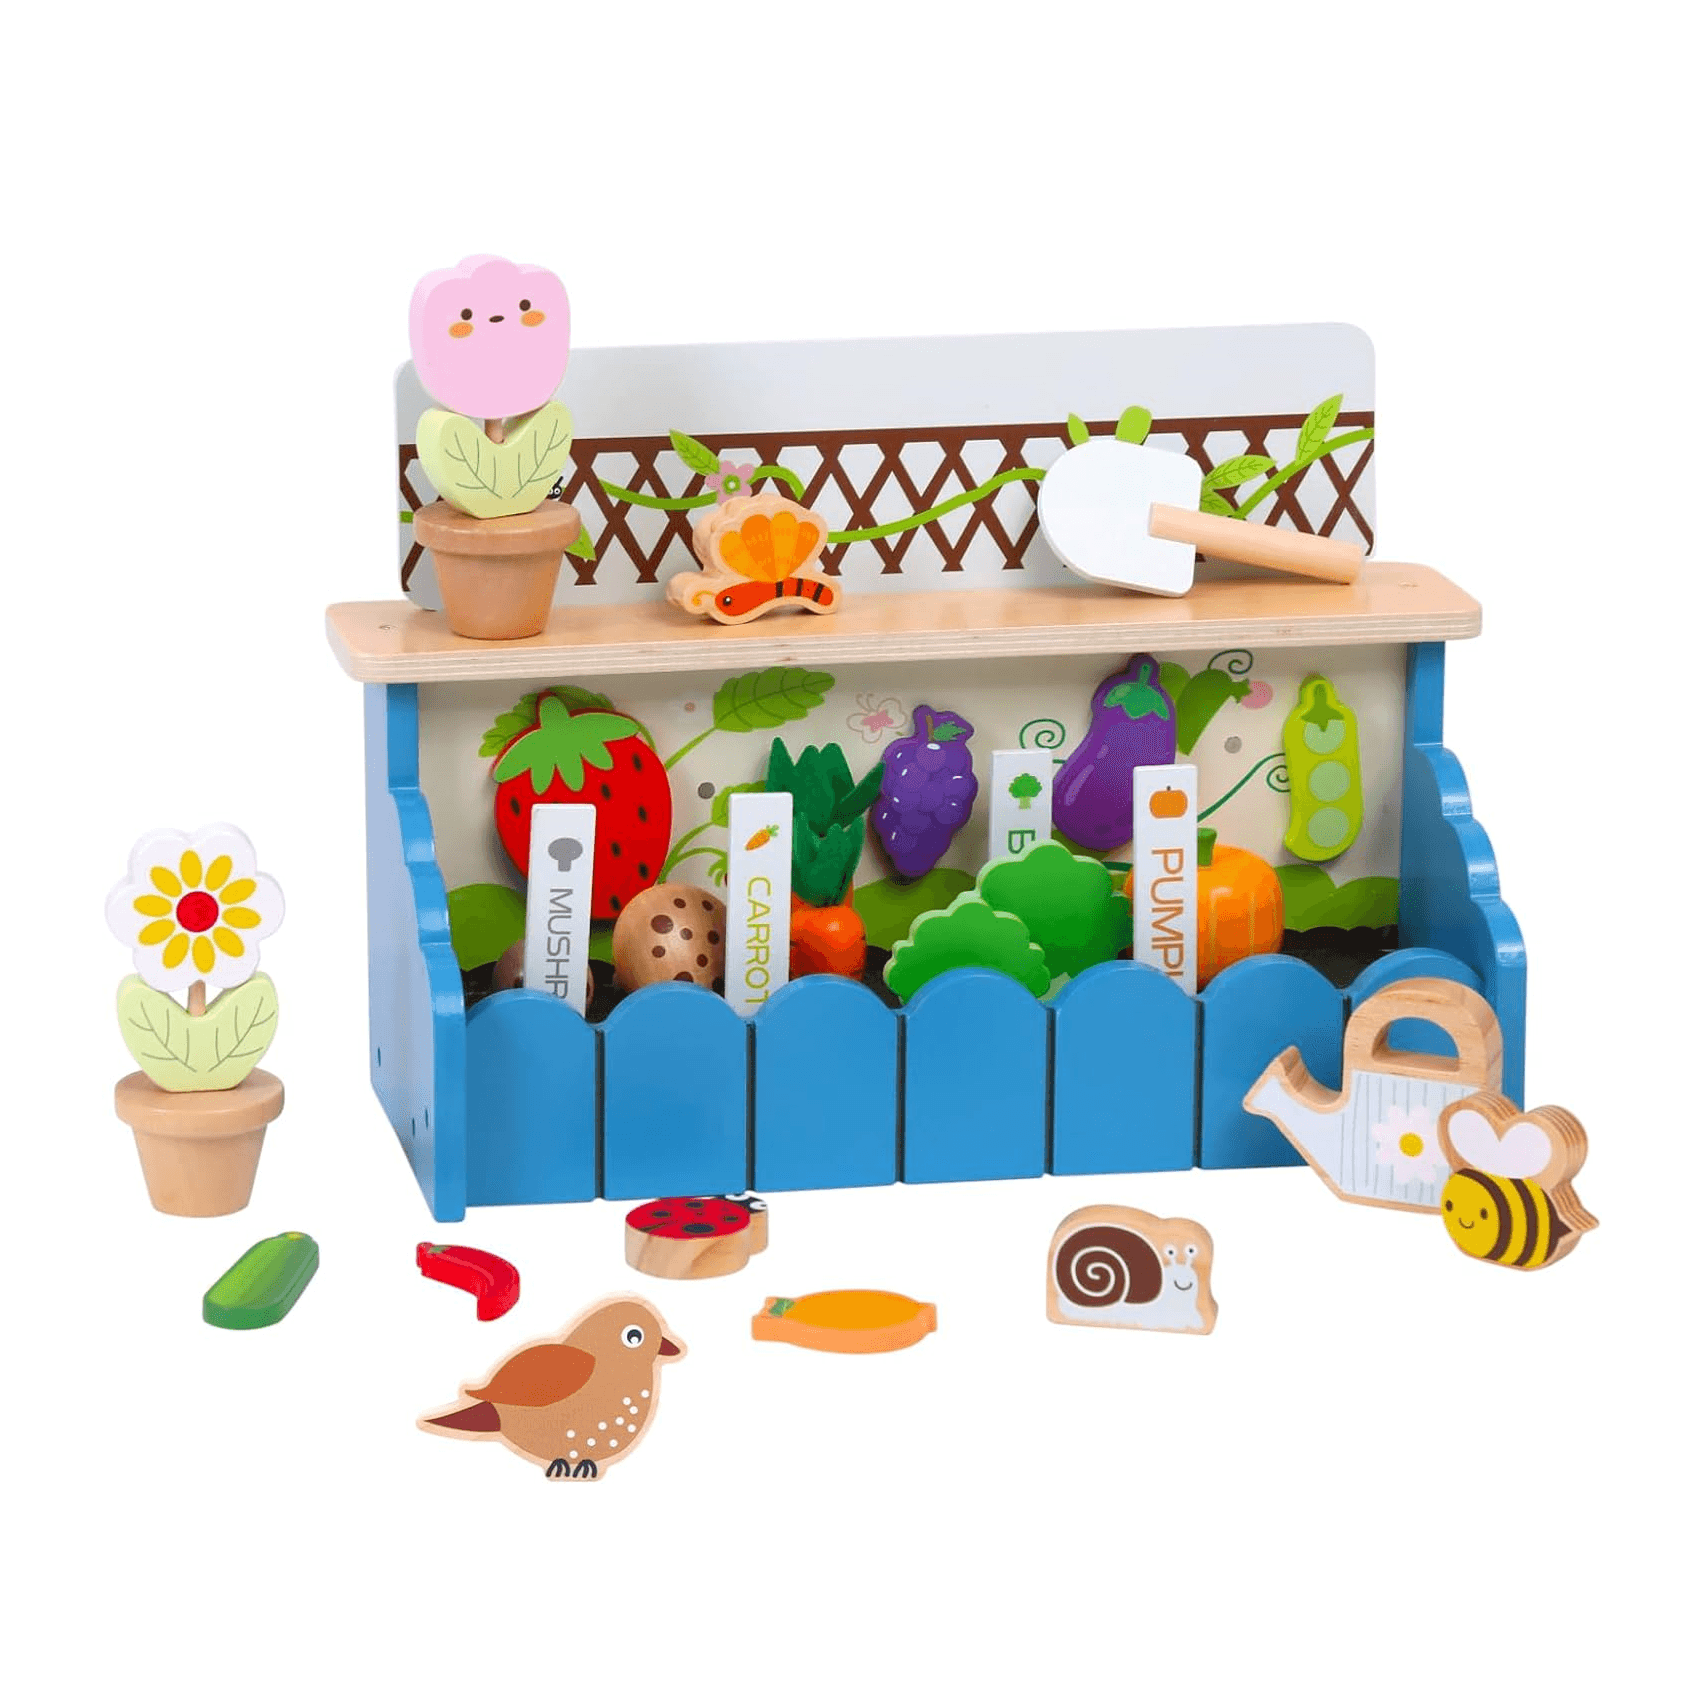 Montessori Smartwo Vegetable and Fruit Garden Toy Playset